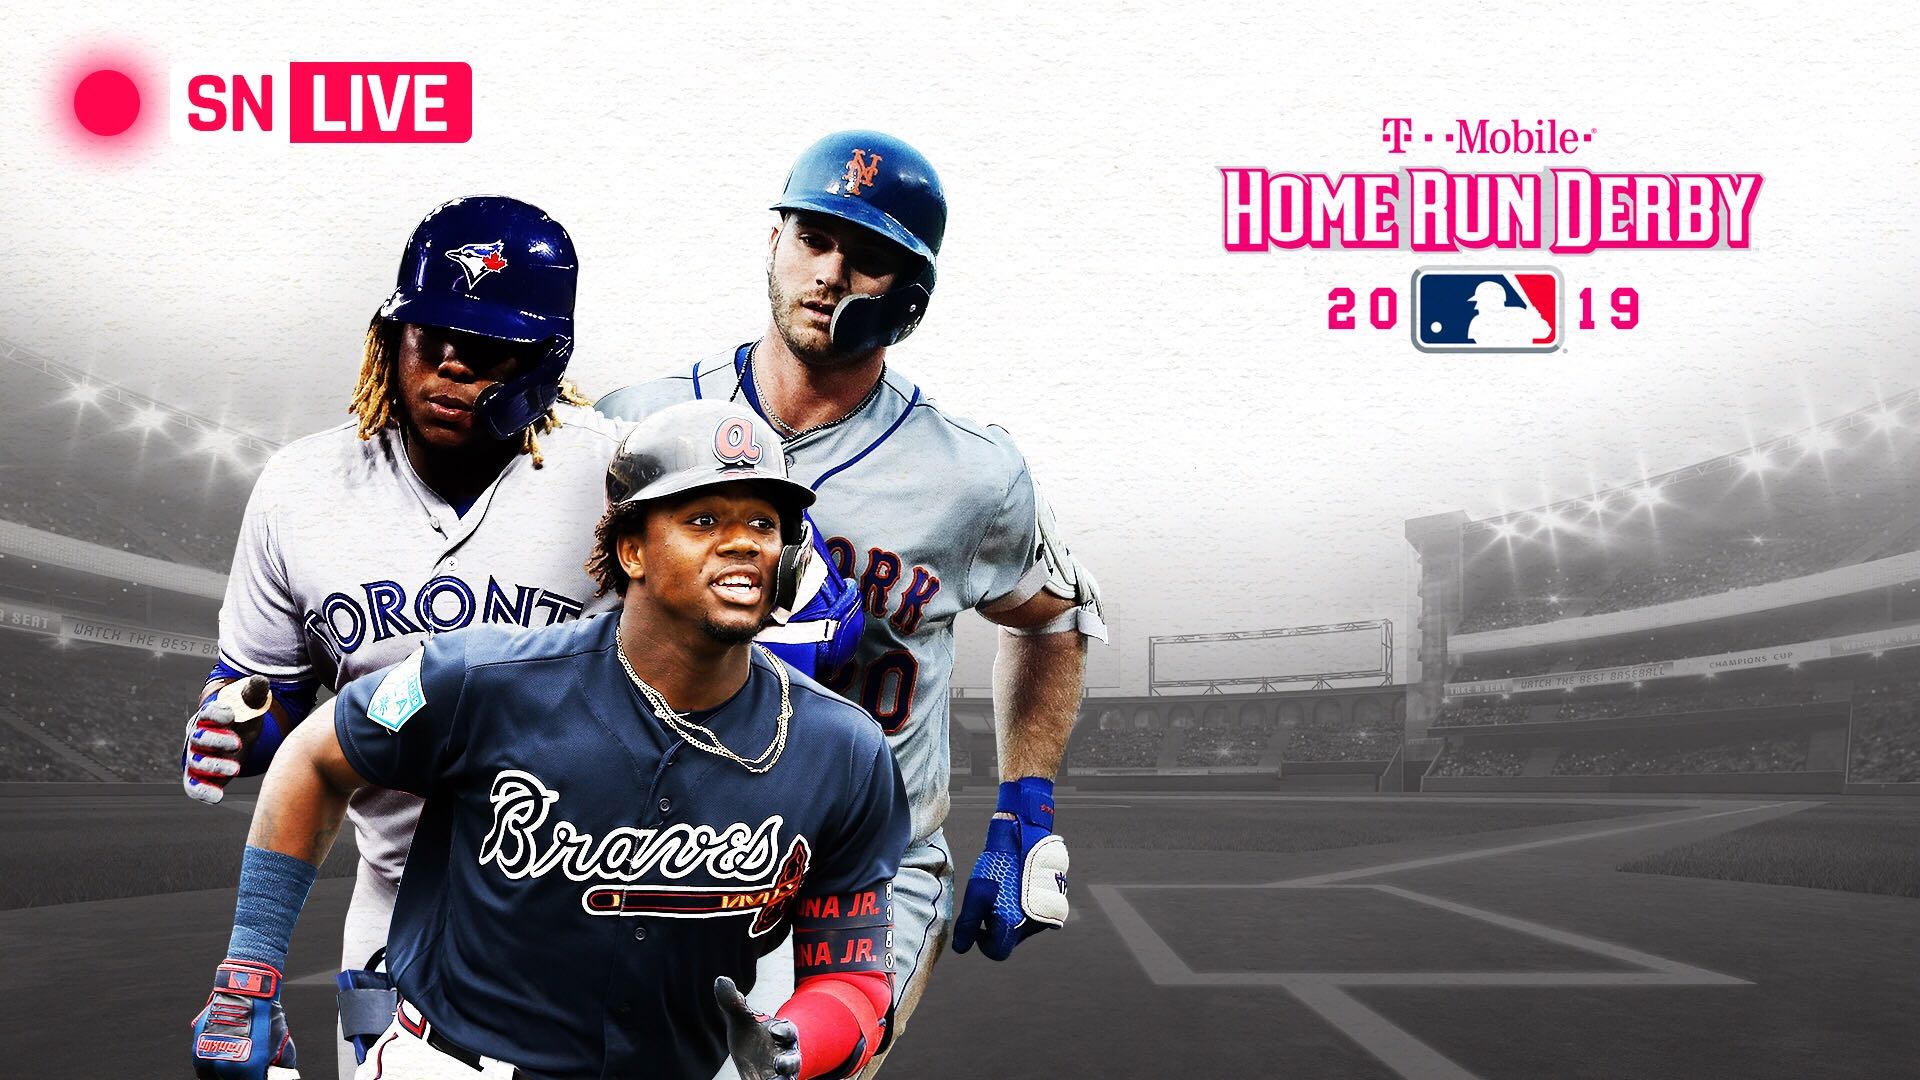 Home Run Derby 2019 results Mets' Pete Alonso launches epic dingers